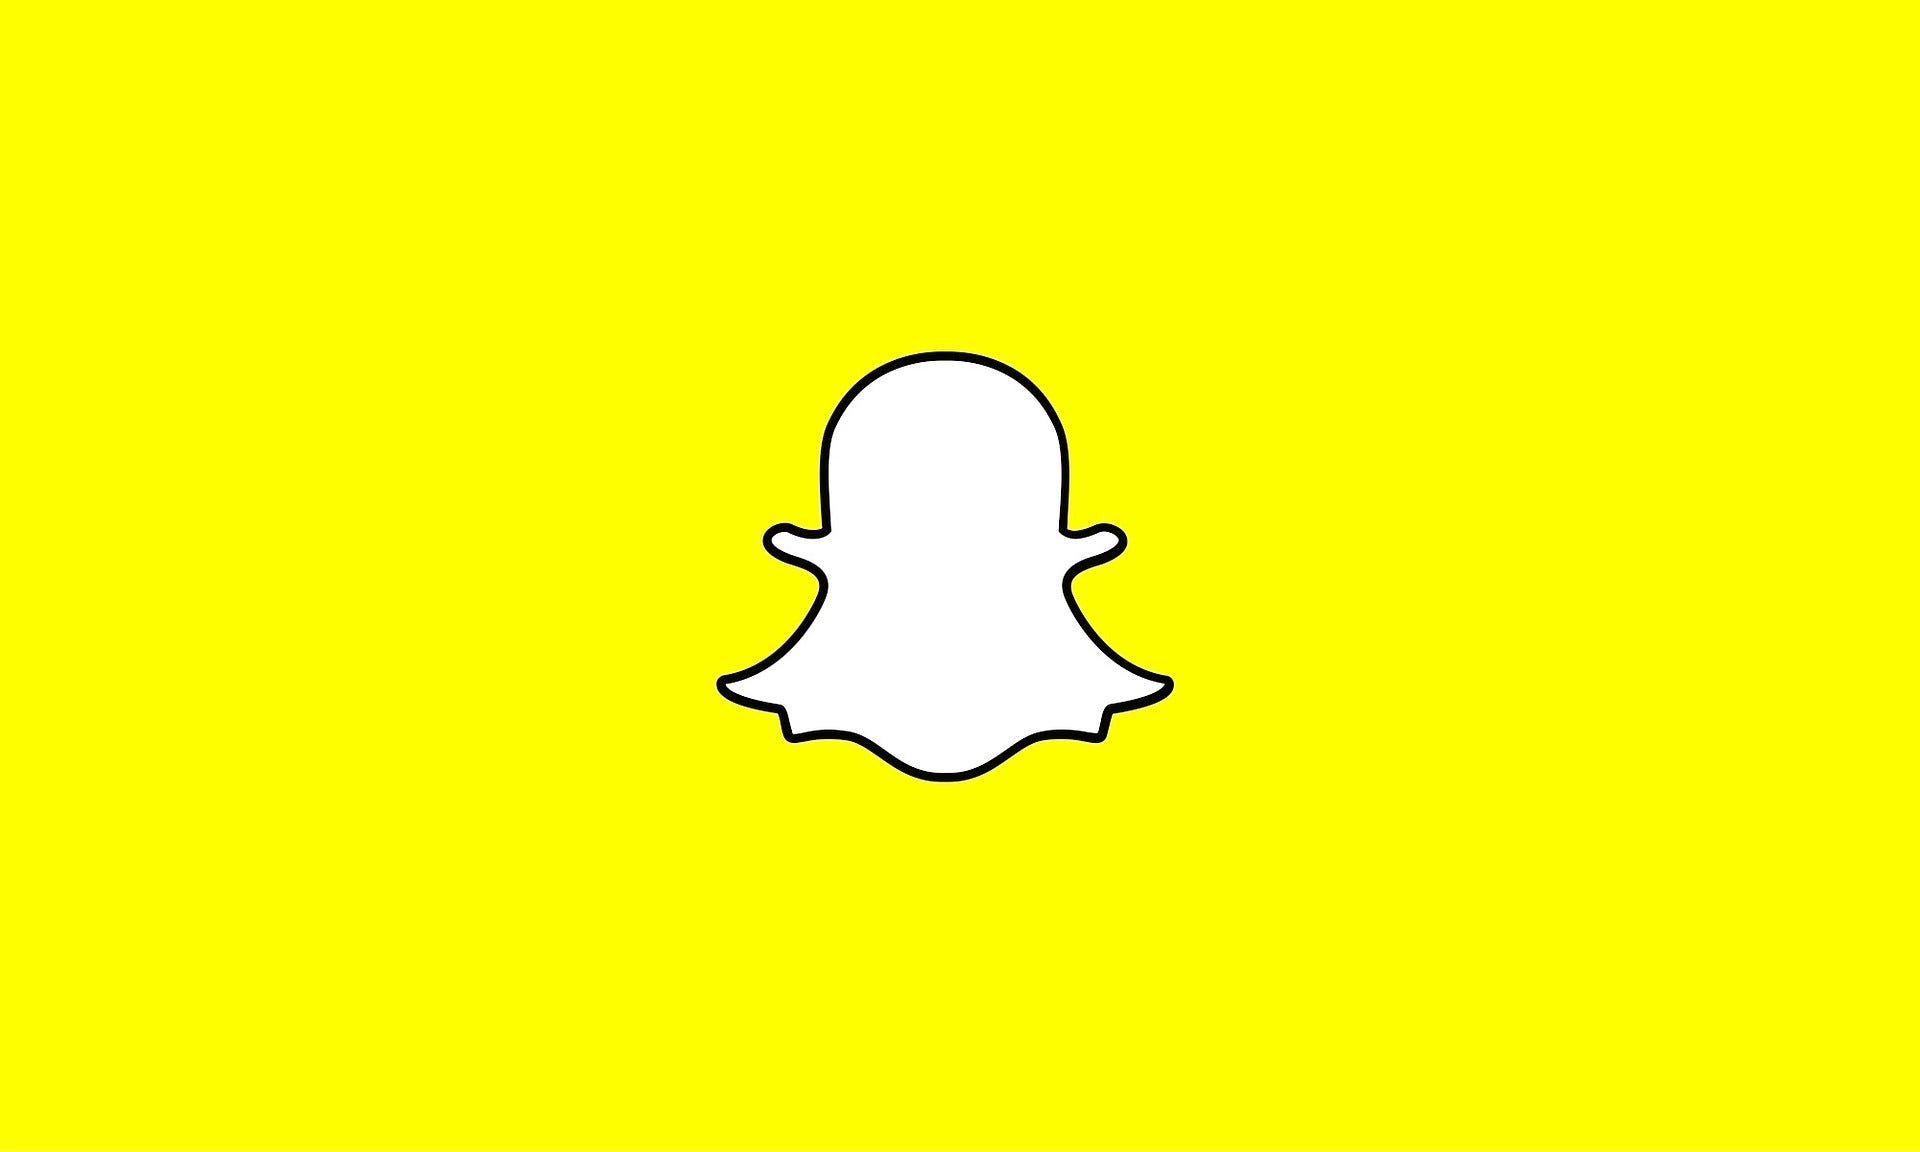 7 Snap Analysts On Q3 Sales Miss: 'Meaningful Competition From TikTok'